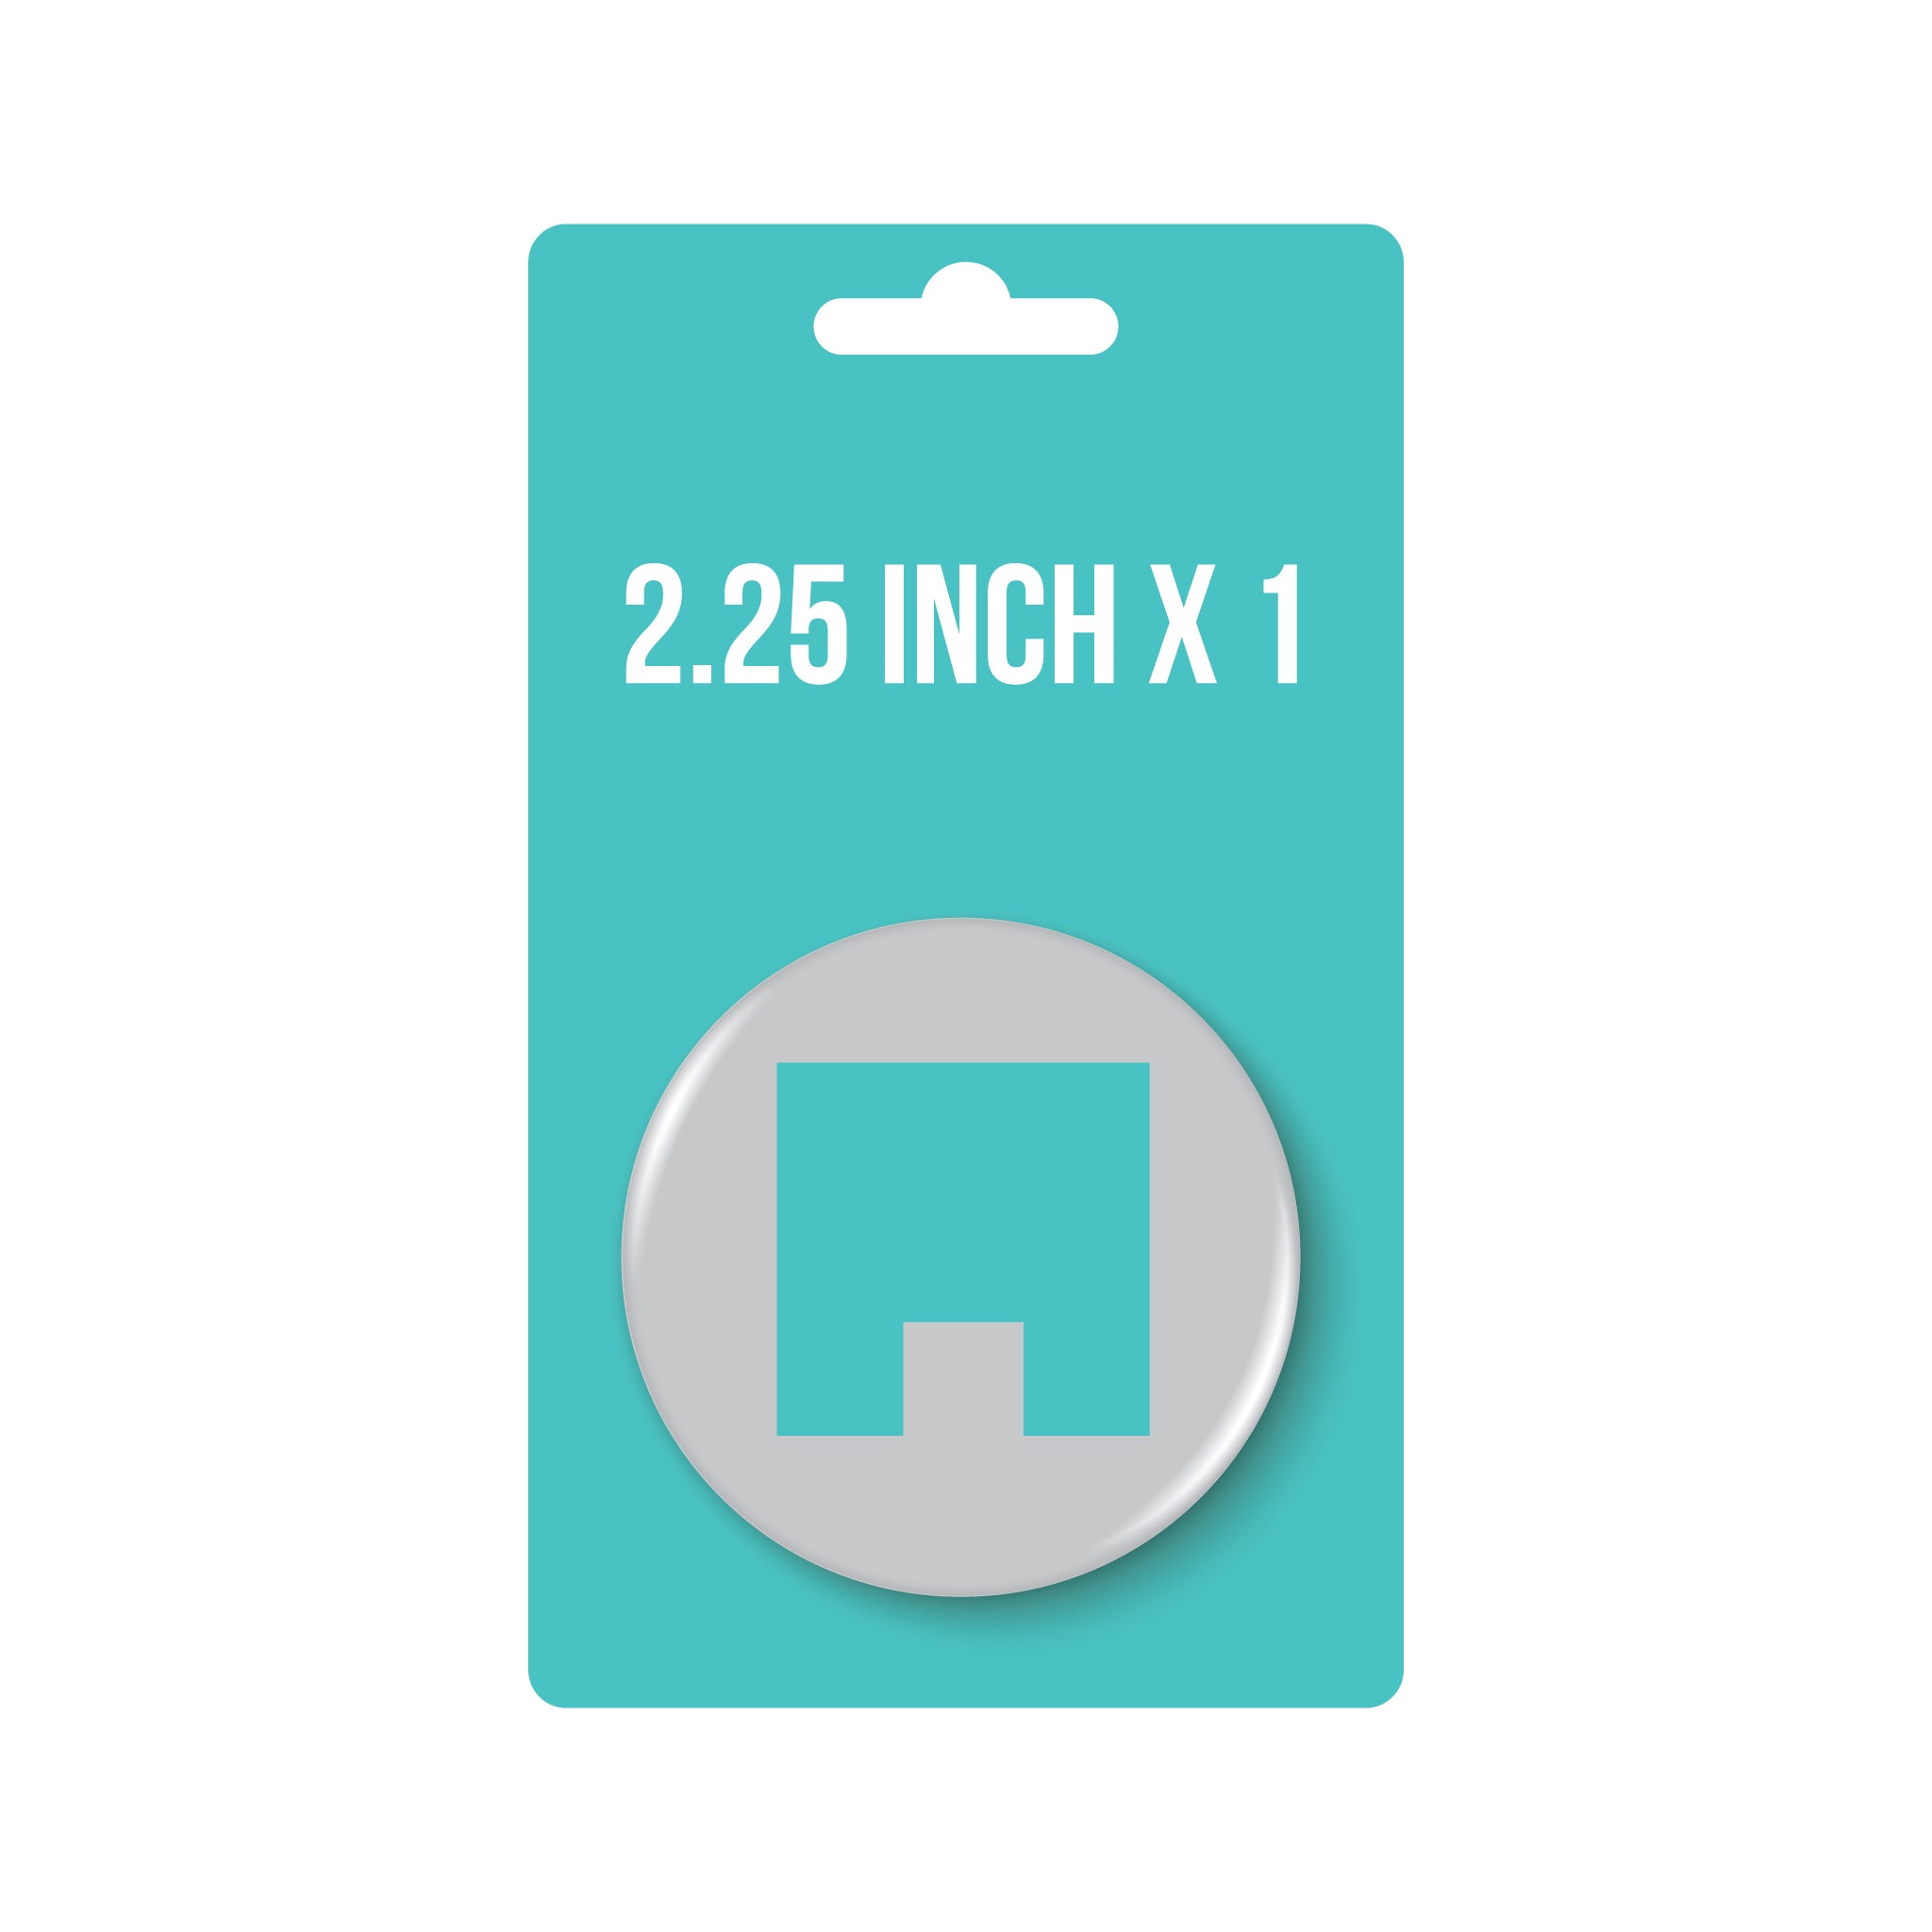 2.25" x 1 Button Pack